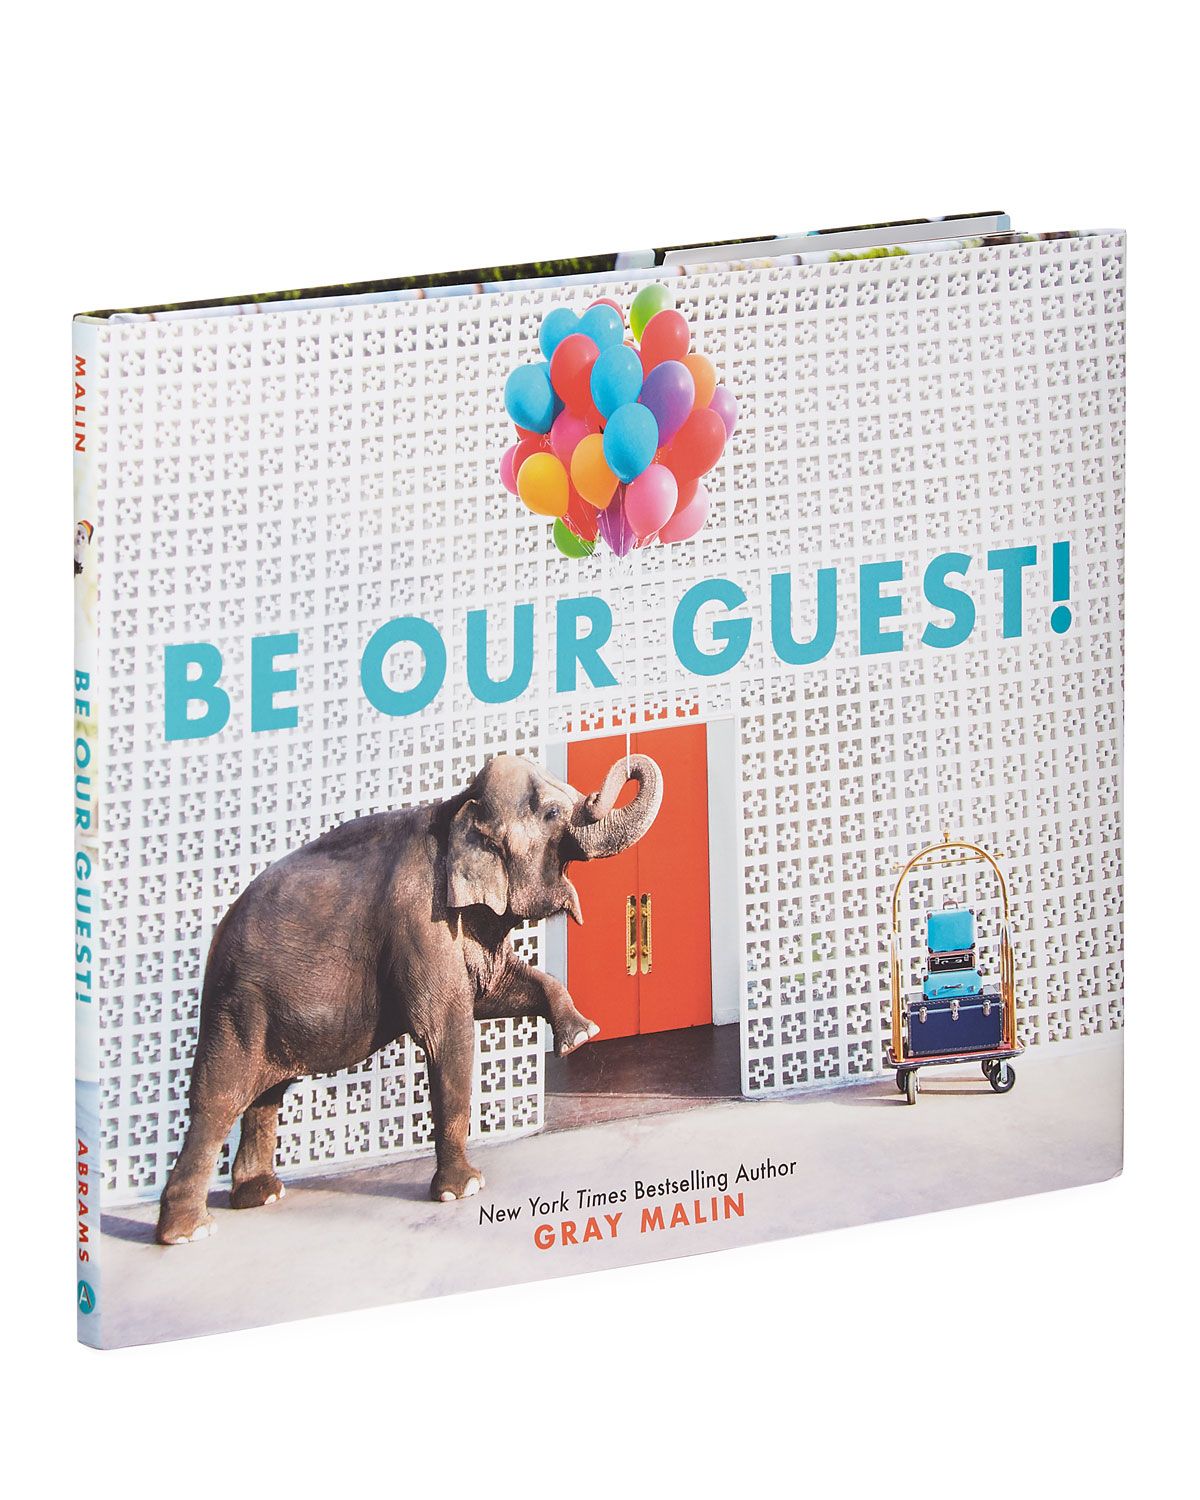 Be Our Guest! Book by Gray Malin | Neiman Marcus